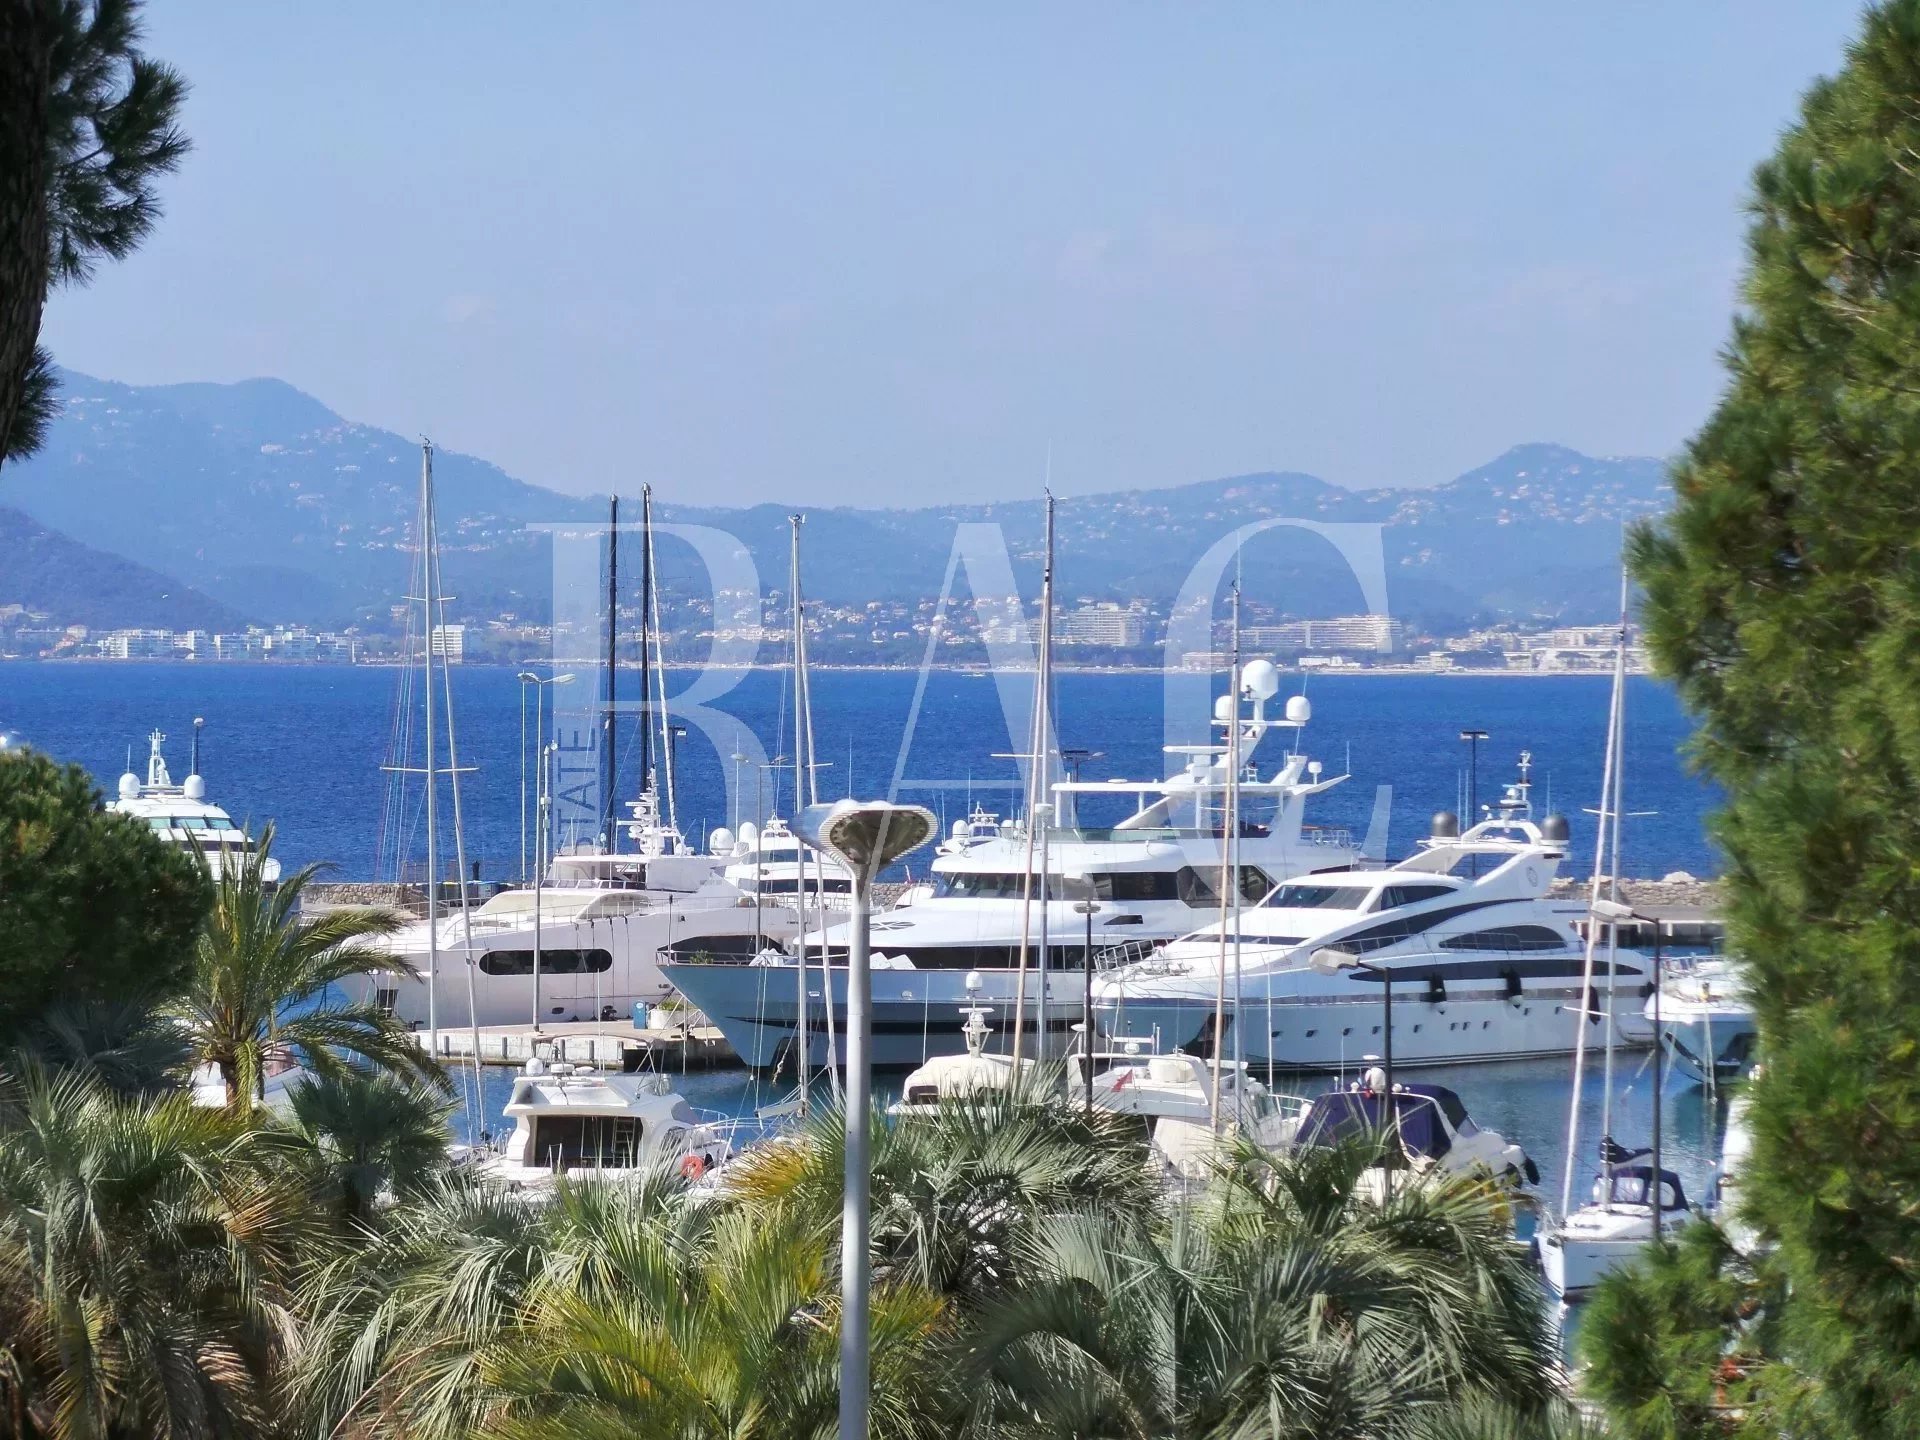 Cannes, Boulevard de la Croisette in a sought after residence and only 1700 meters from the Palais du festival des films